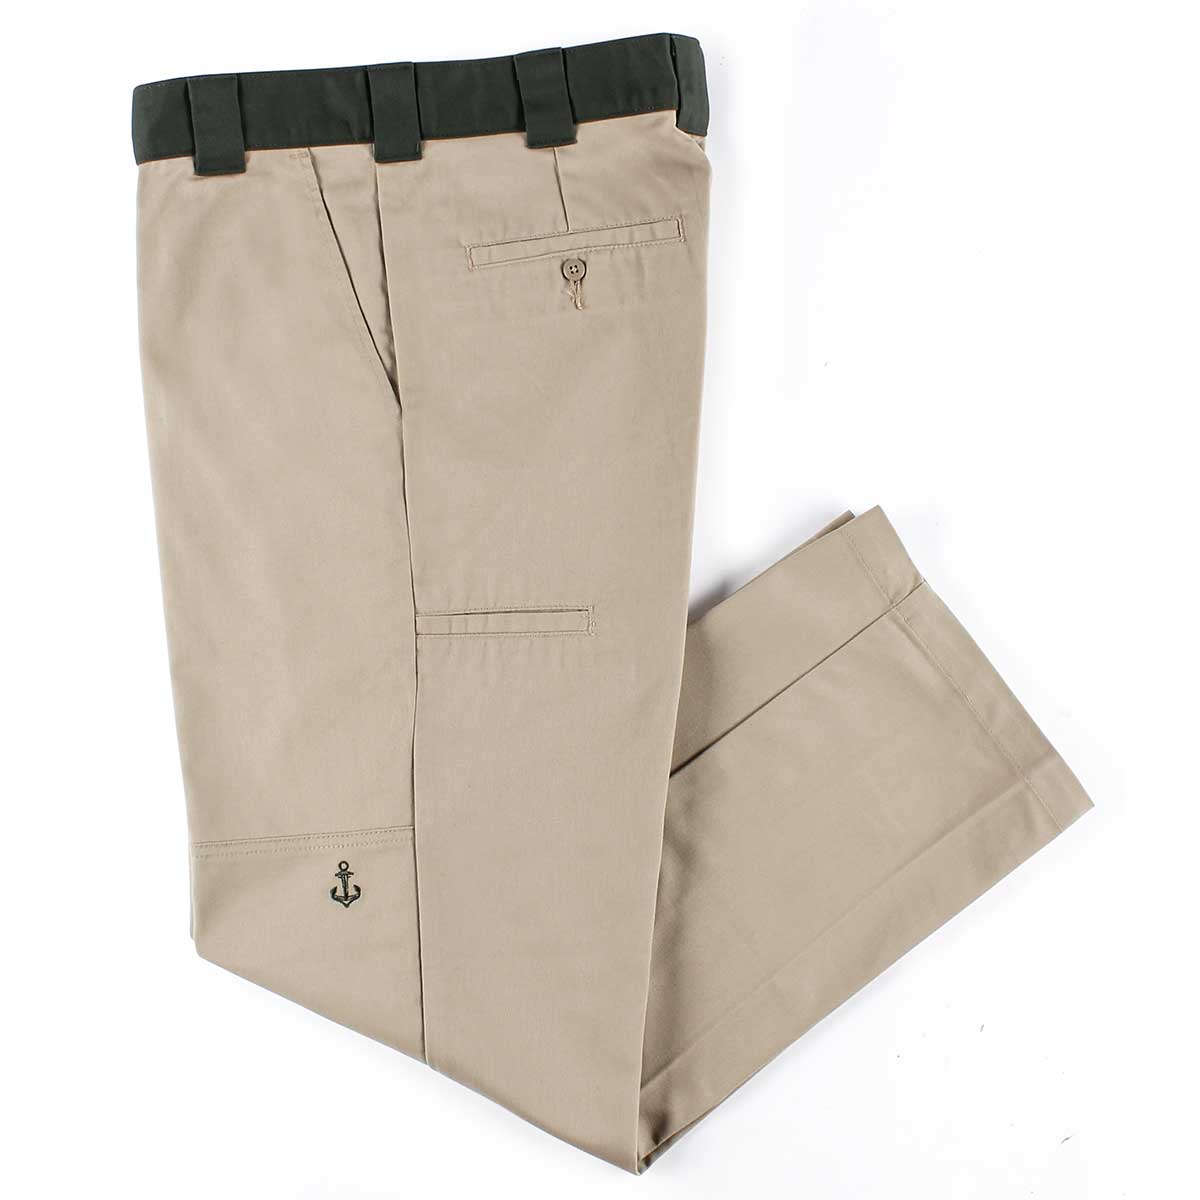 Dickies Ronnie Sandoval Double Knee Pants - Olive Green/Black Color Bl